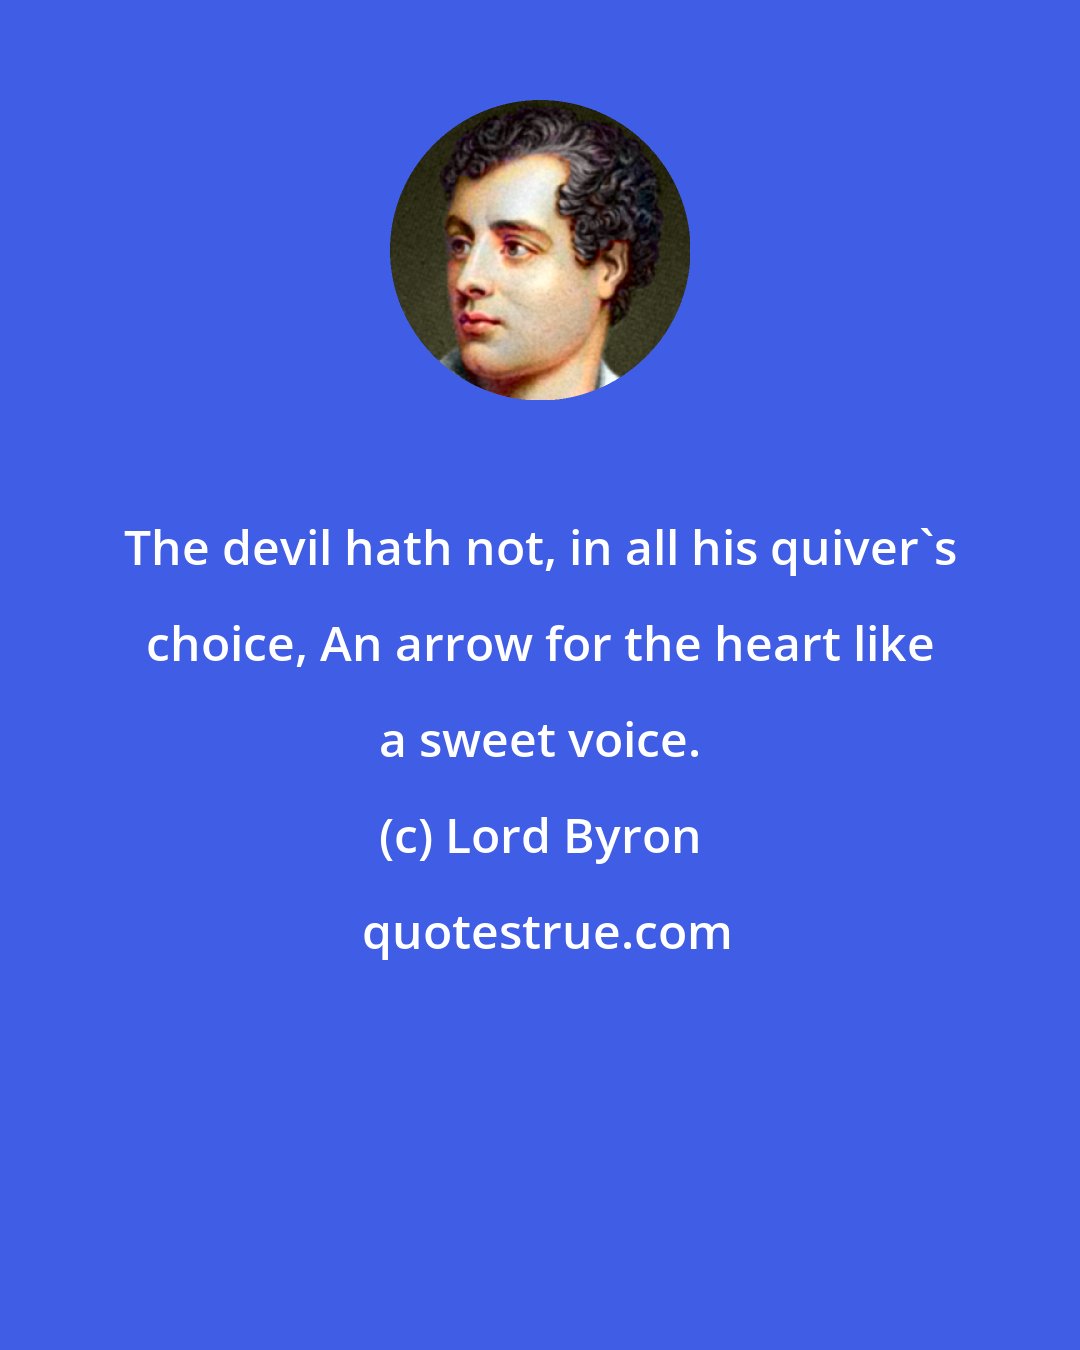 Lord Byron: The devil hath not, in all his quiver's choice, An arrow for the heart like a sweet voice.